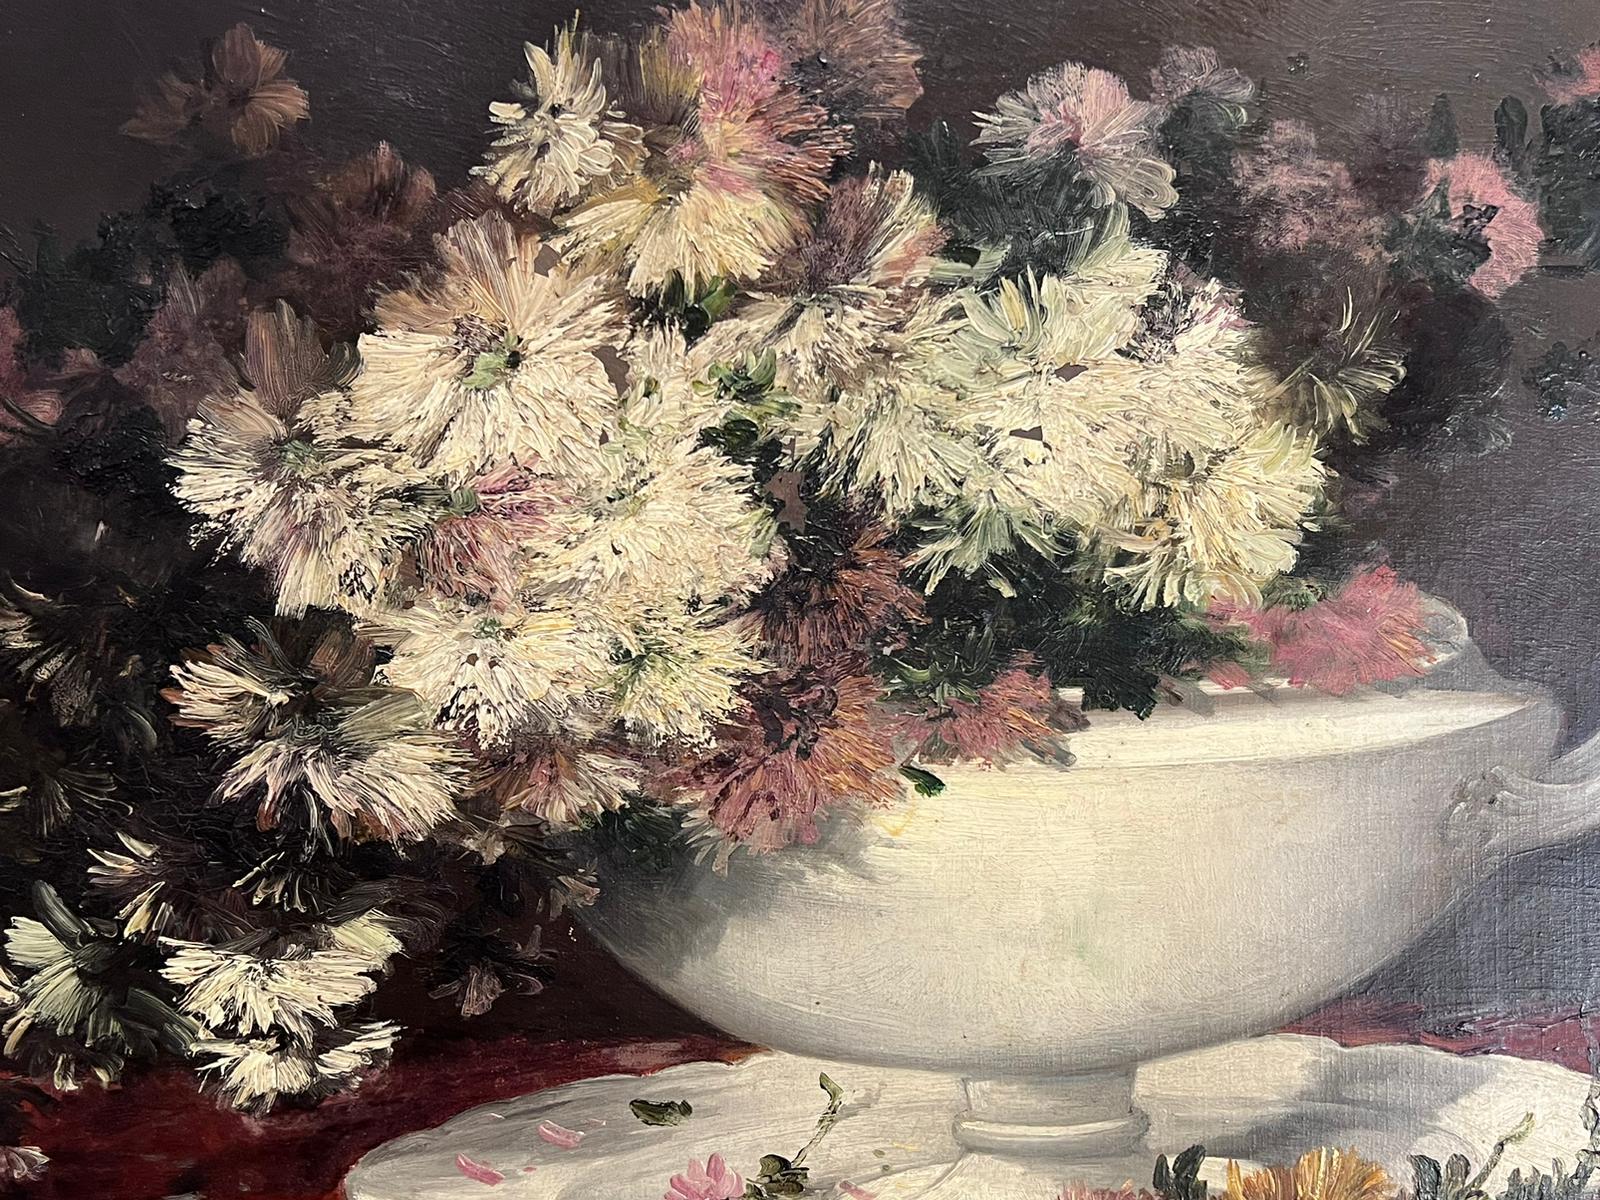 Flowers in a White Bowl
by Alfred Rouby (French 1849-1909)
Rouby lived in Paris and trained under Pierre-Marie Beyle (1837-1902).

signed oil on canvas, unframed
canvas: 25.5 x 32 inches
provenance: private collection, France
condition: very good